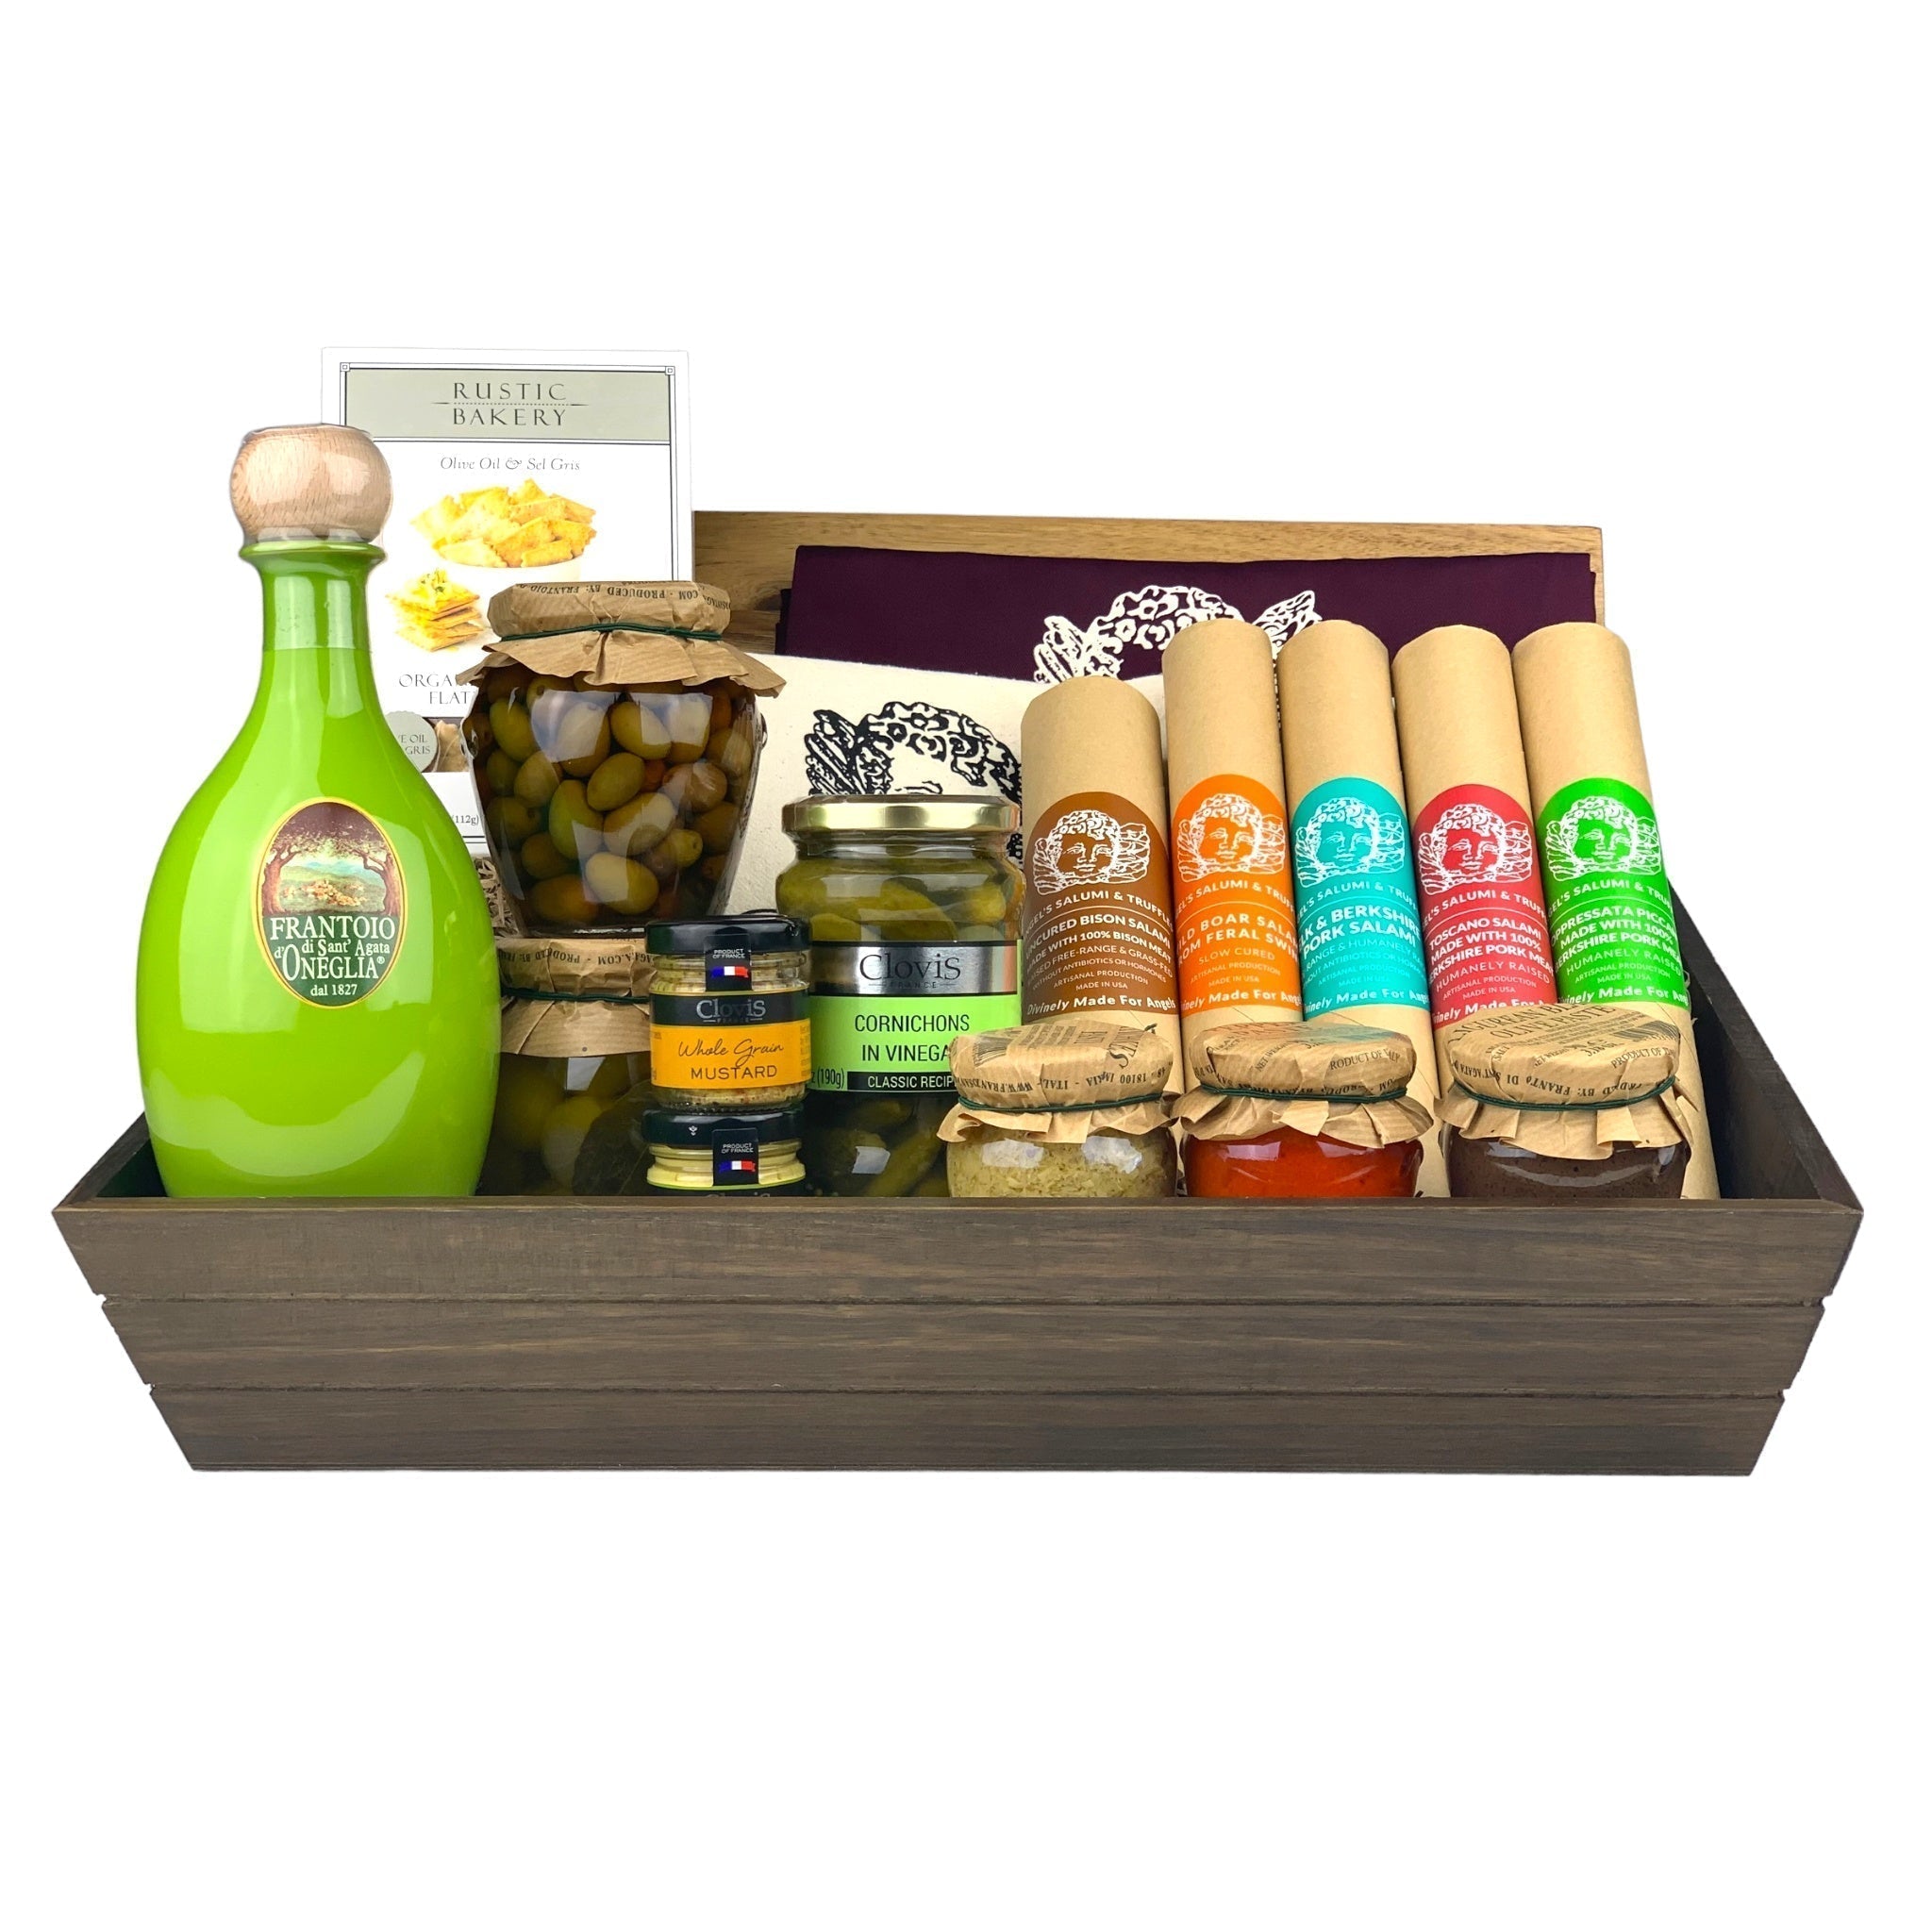 A dark wooden gift box filled with various antipasti and salami